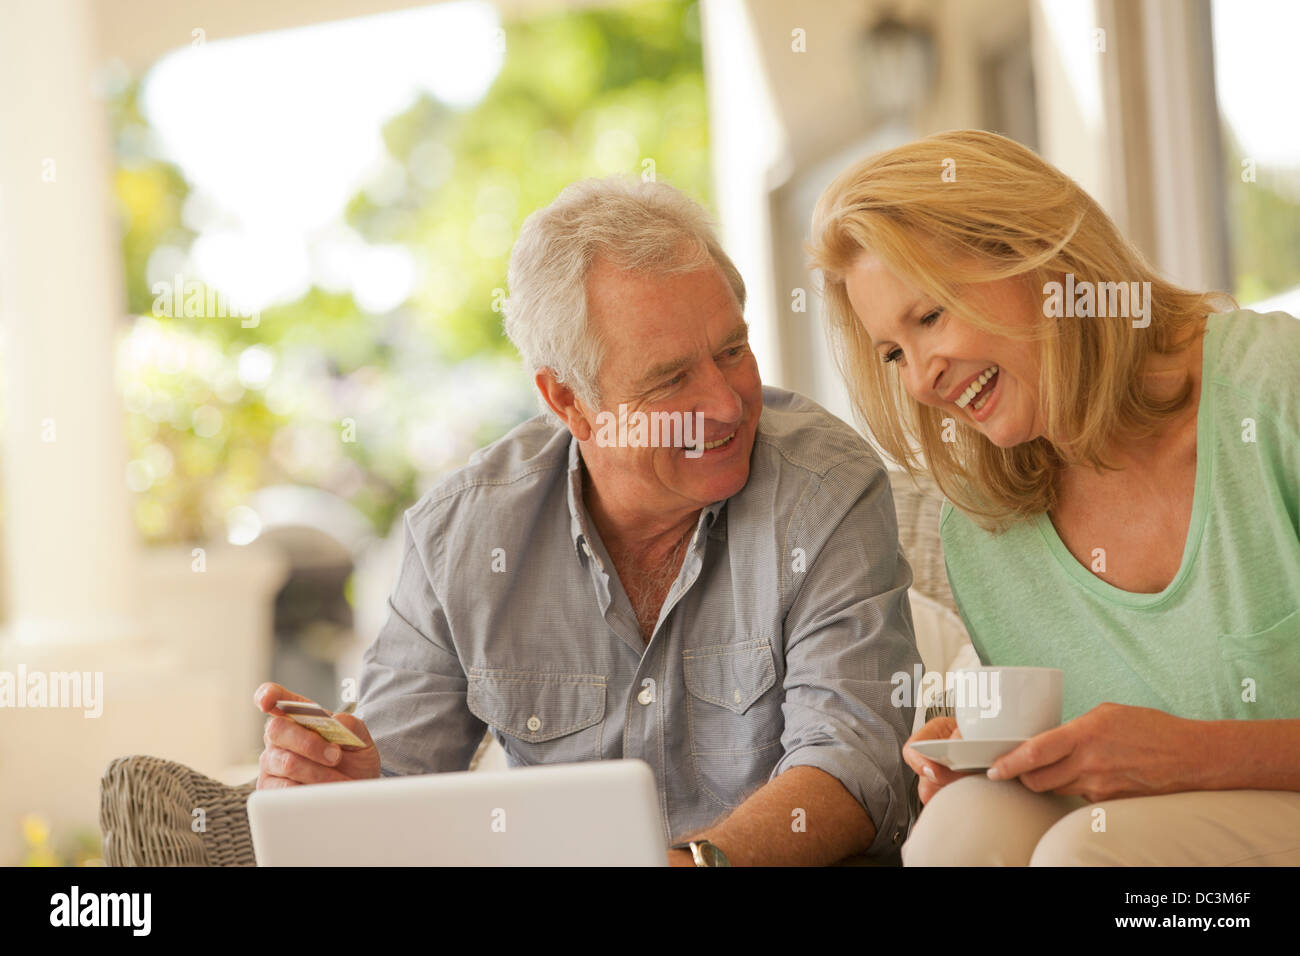 Smiling couple drinking coffee and shopping Banque D'Images